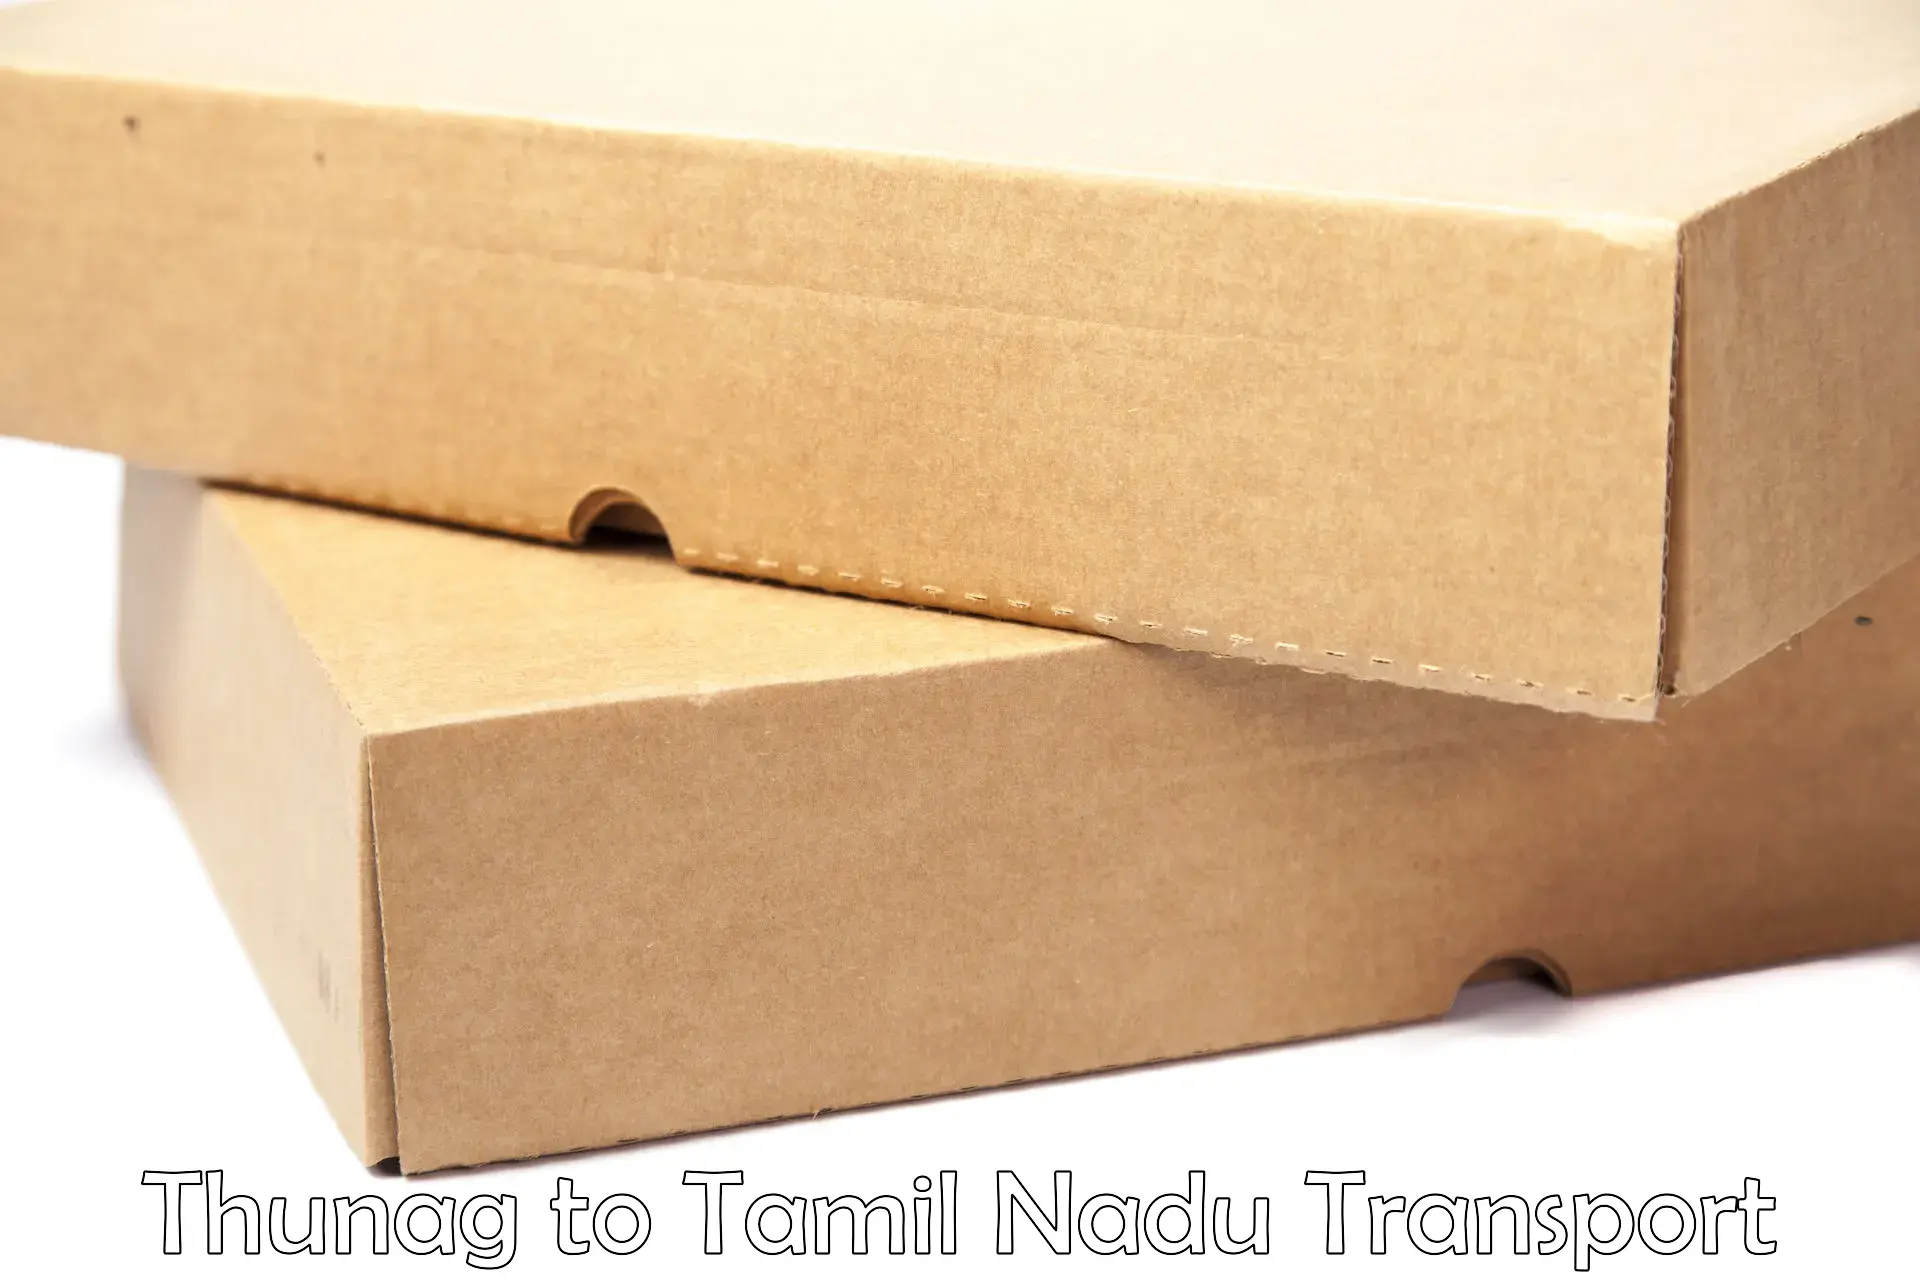 Best transport services in India Thunag to Omalur